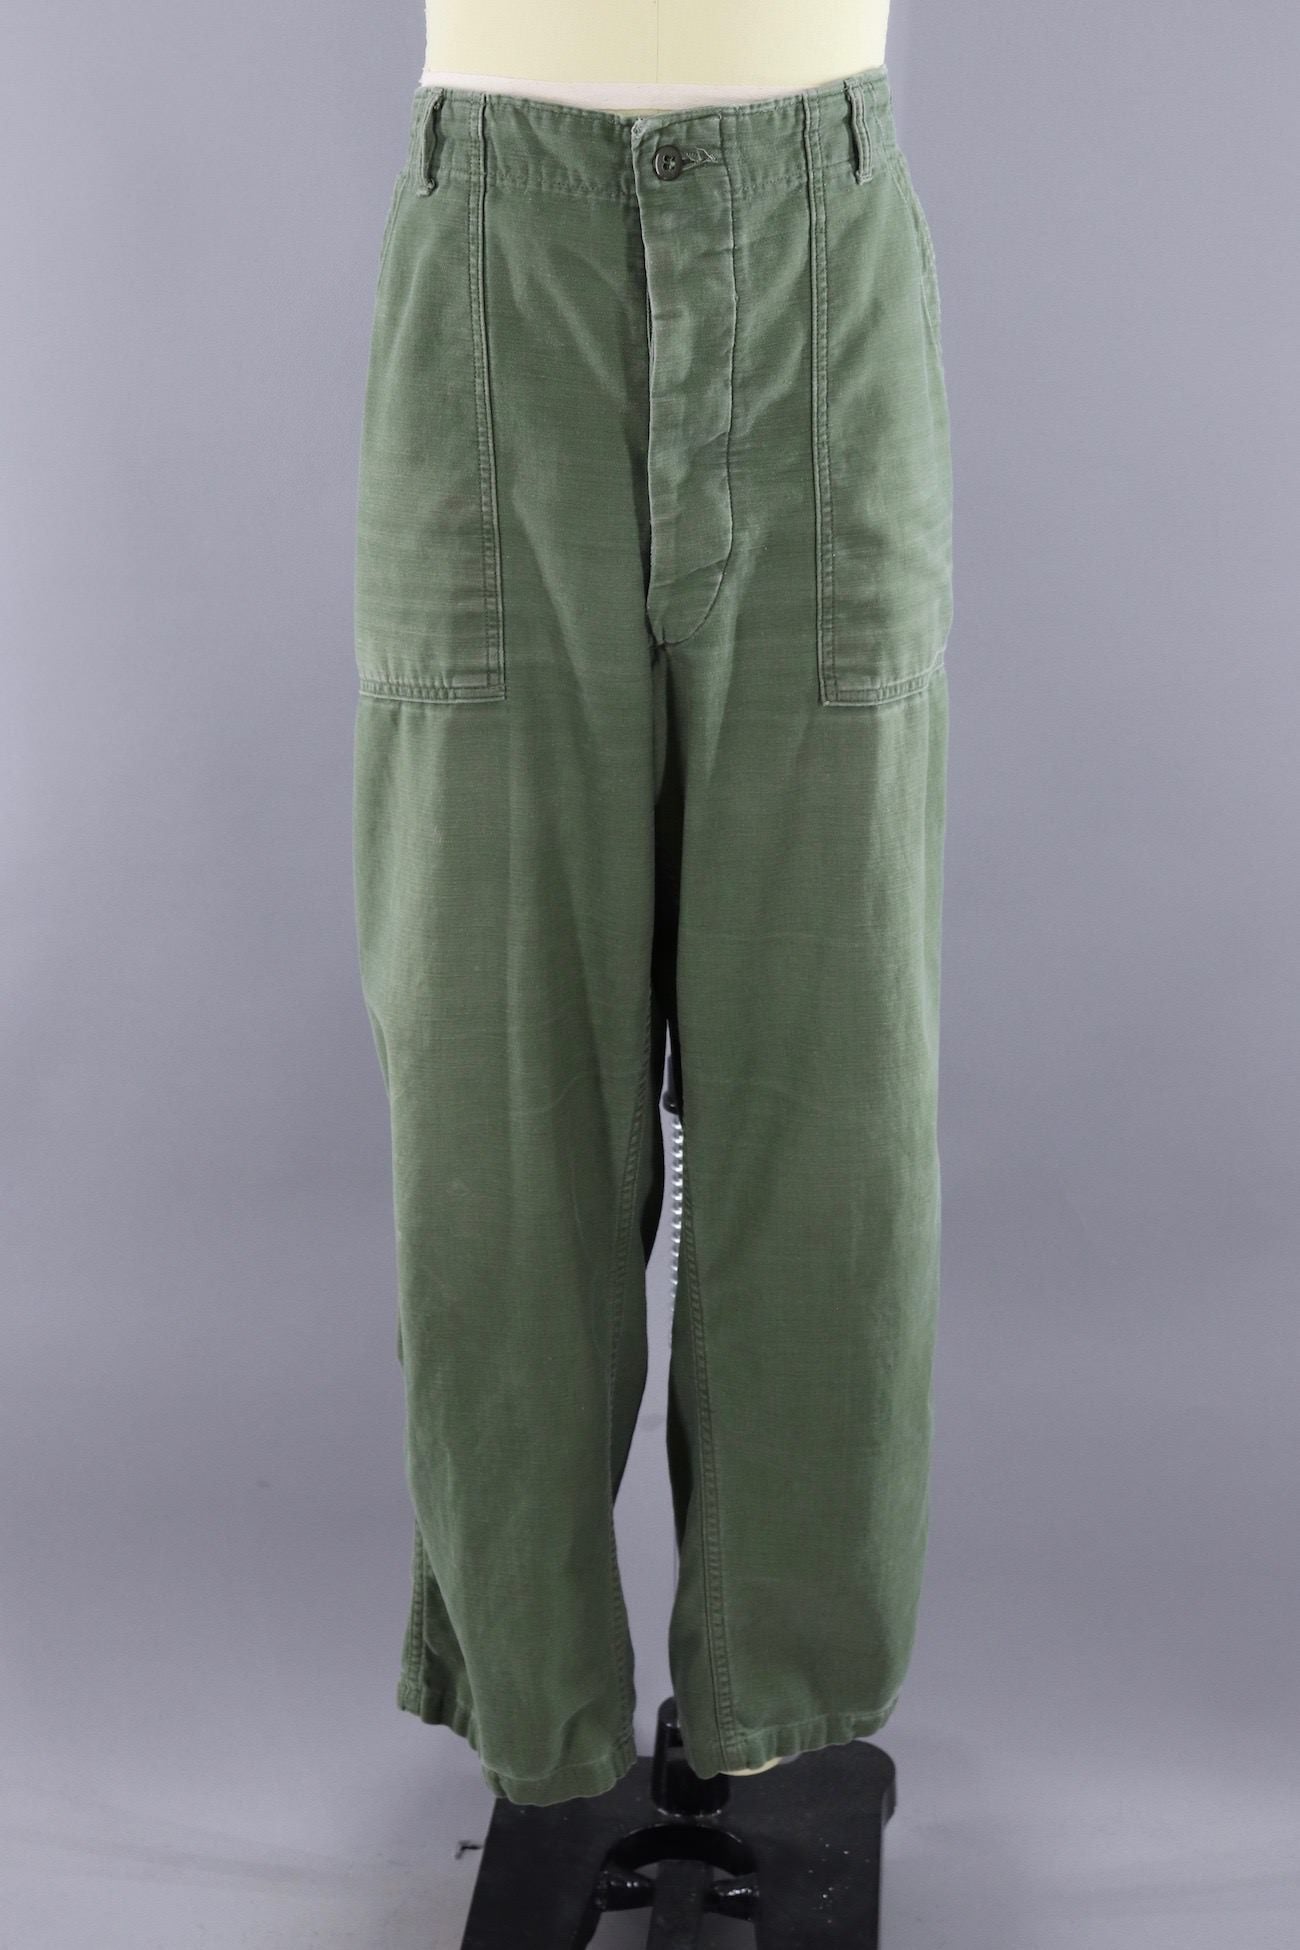 Vintage 1950s-1960s US Army Pants / OG-107 Olive Drab – ThisBlueBird